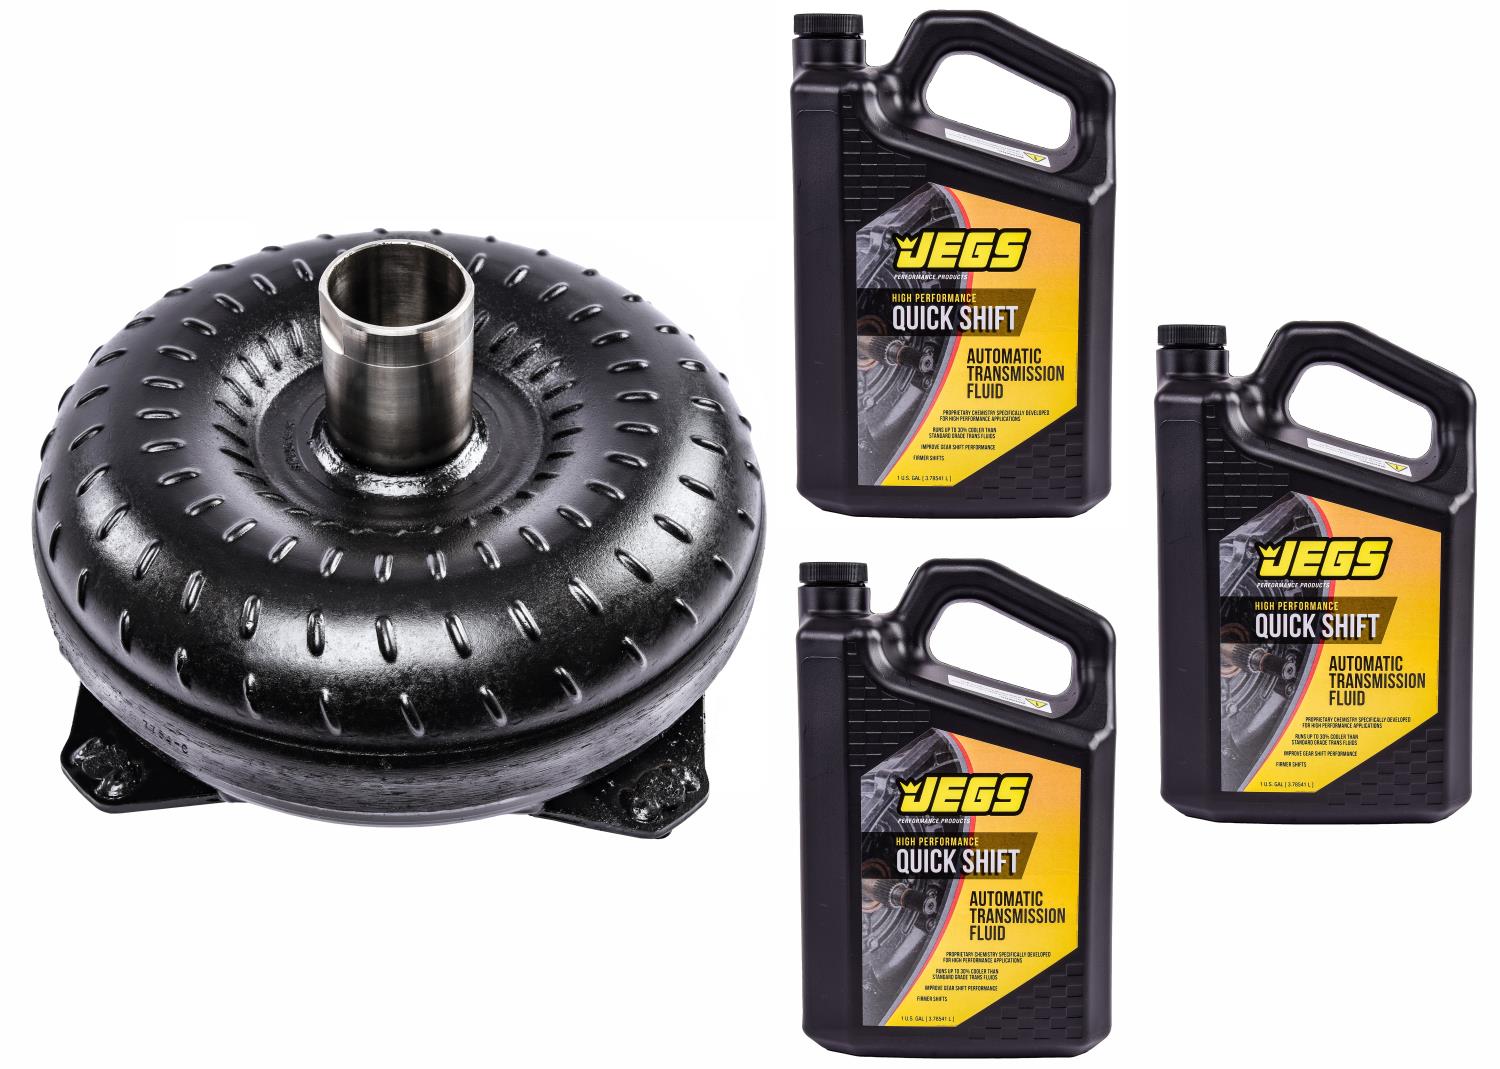 JEGS 60409K: Torque Converter Kit | Fits Ford C4 Automatic Transmission |  Includes 2600-2900 RPM Stall Speed Converter & (3) Gallons of Transmission  Fluid - JEGS